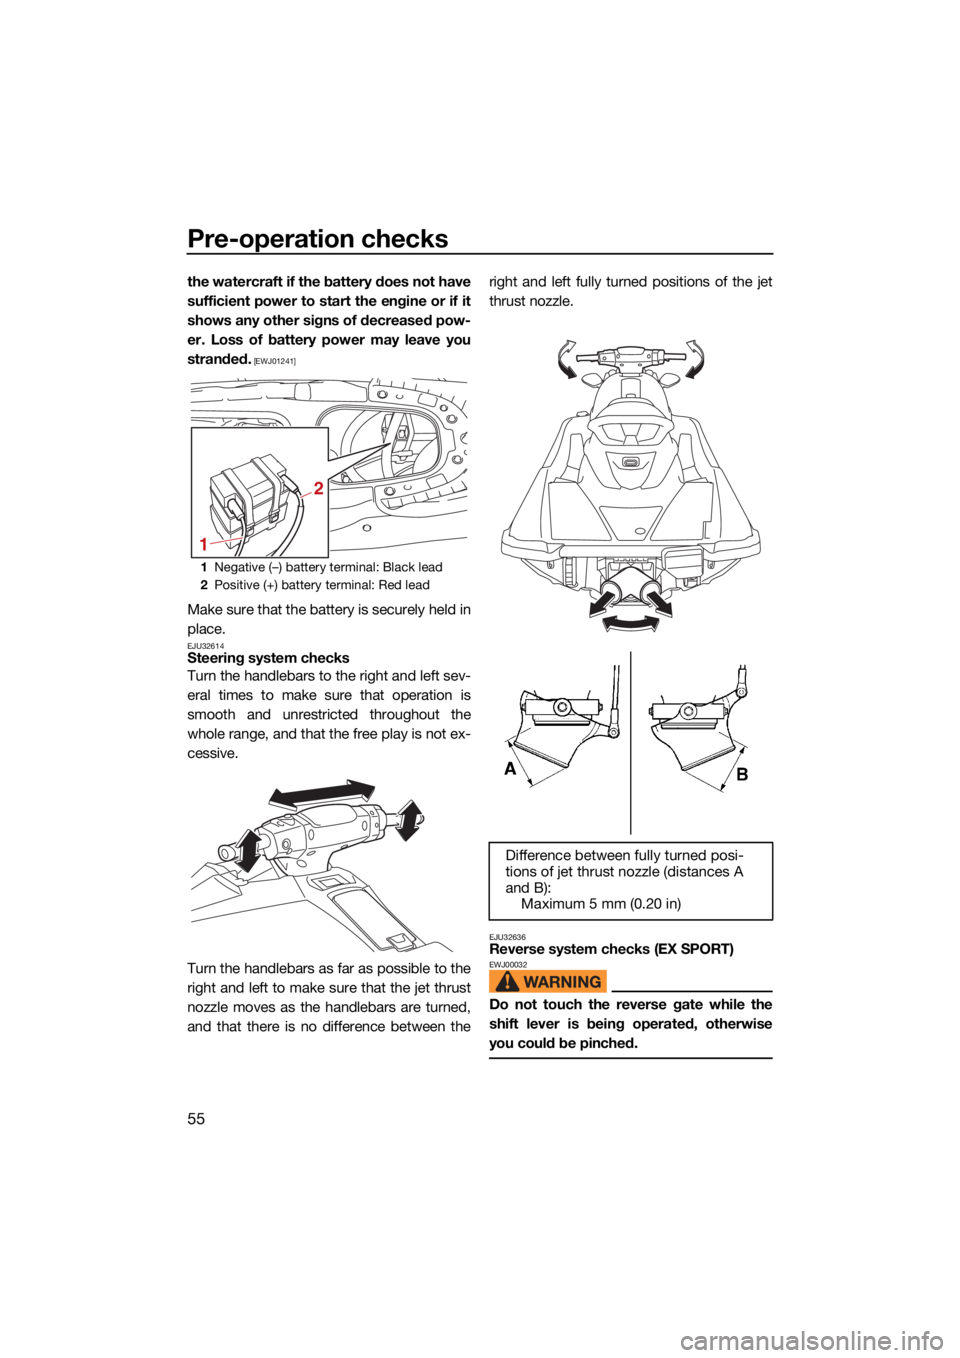 YAMAHA EX DELUXE 2021  Owners Manual Pre-operation checks
55
the watercraft if the battery does not have
sufficient power to start the engine or if it
shows any other signs of decreased pow-
er. Loss of battery power may leave you
strand